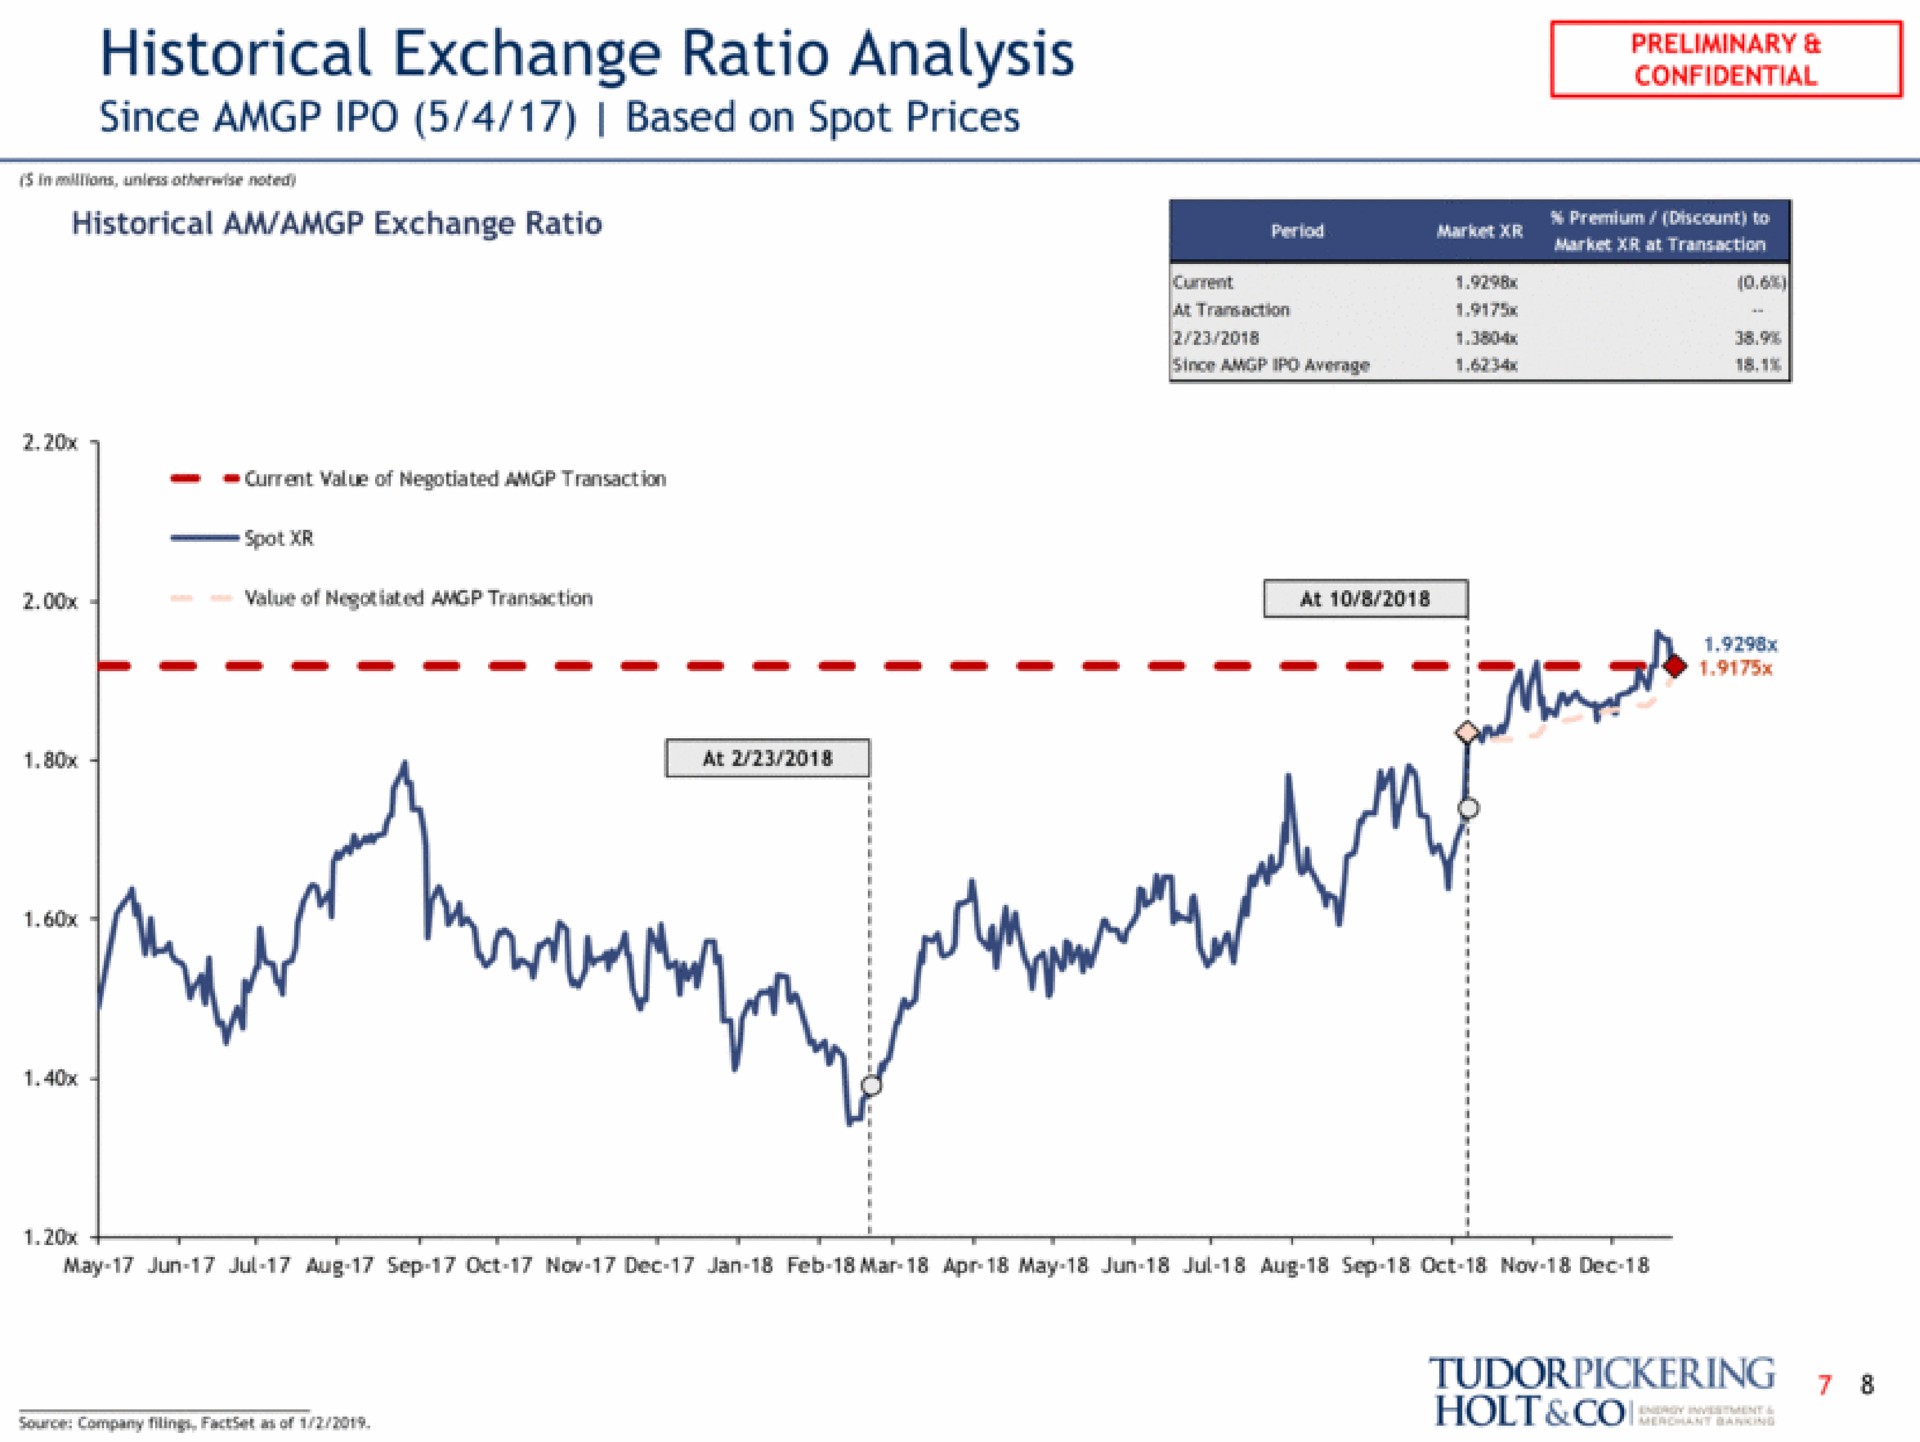 historical exchange ratio analysis since based on spot prices | Tudor, Pickering, Holt & Co